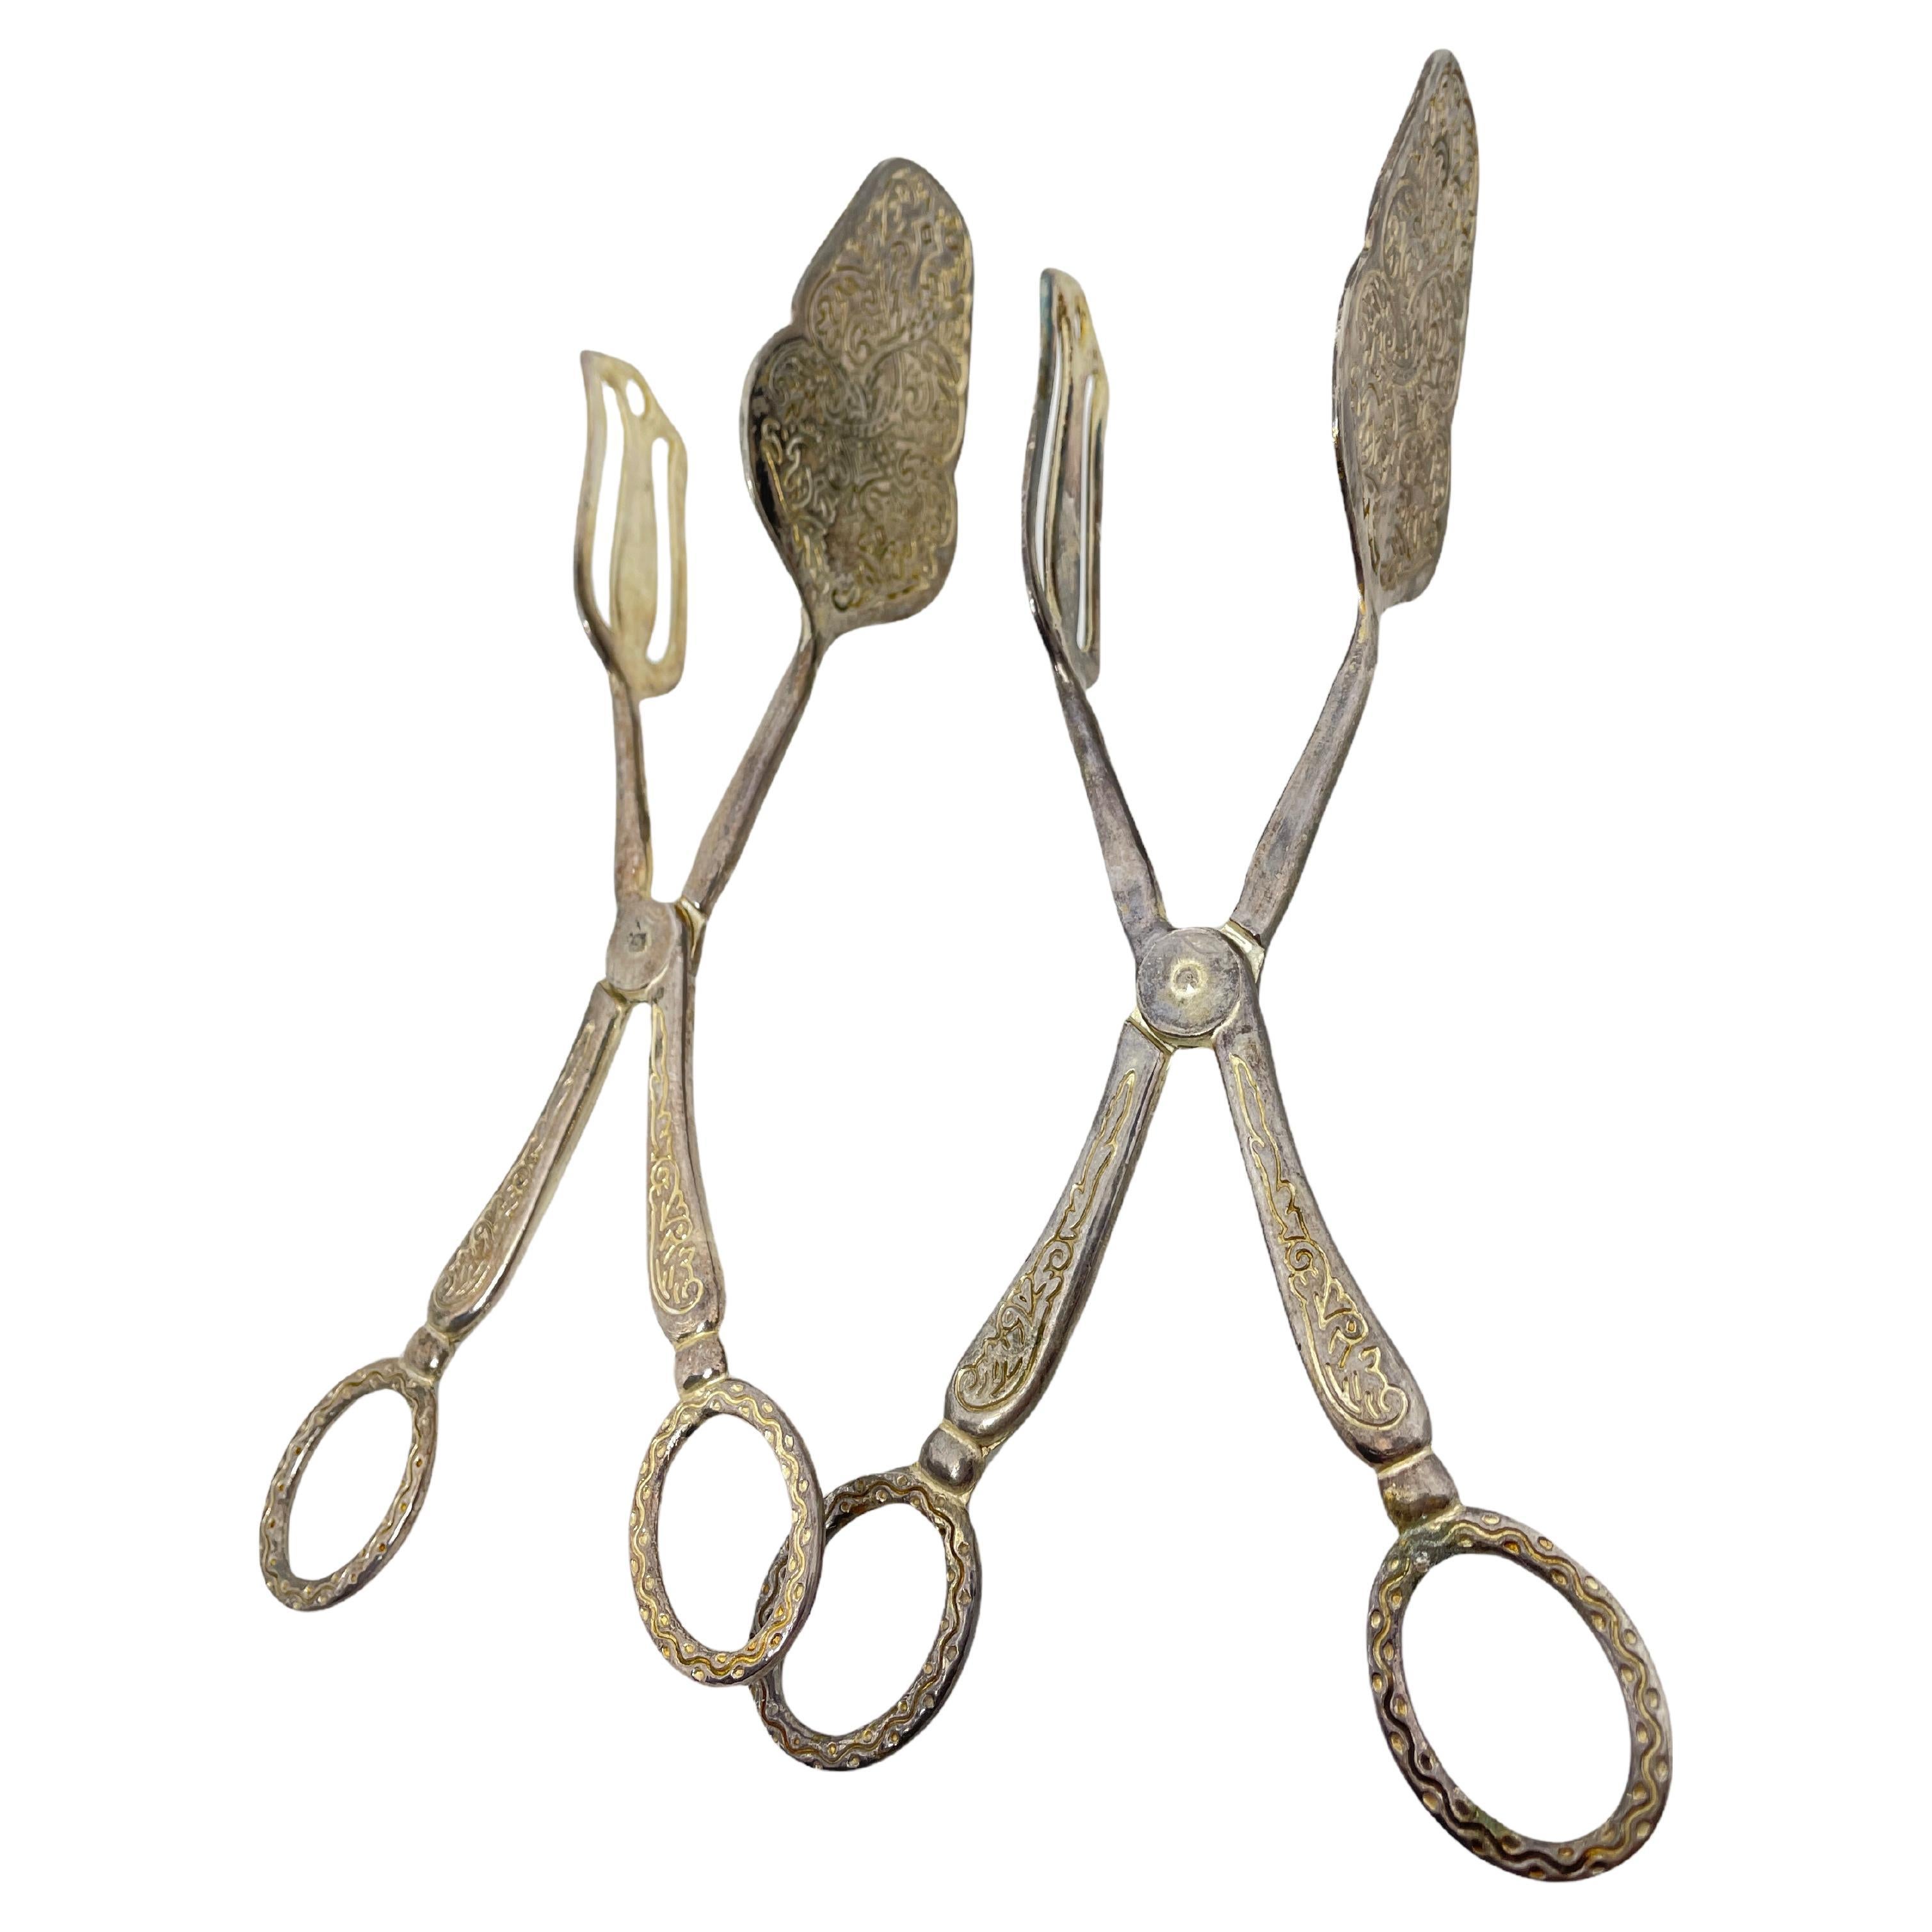 Pair of Art Nouveau Silver Plate Serving Tongs for Cake or Pastry, Sweden, 1920s